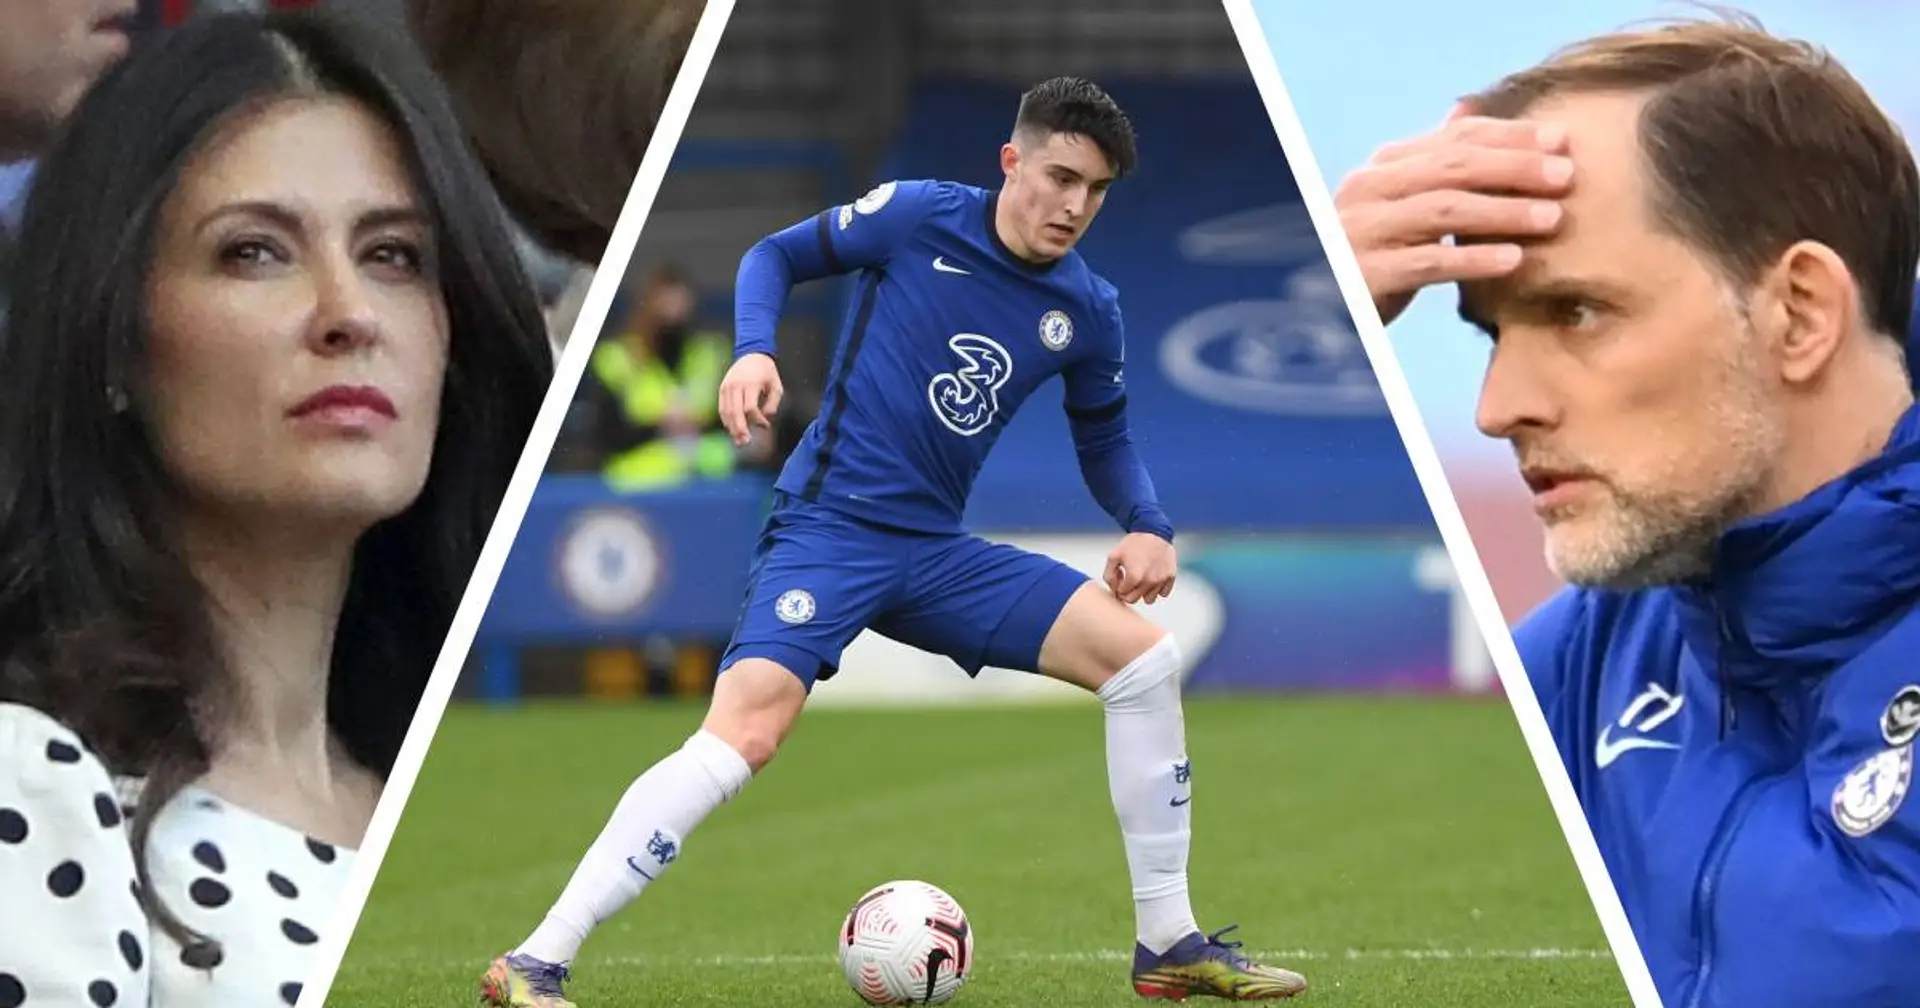 Chelsea 'on verge' of losing Livramento & 2 other top academy talents to Premier League clubs: The Athletic